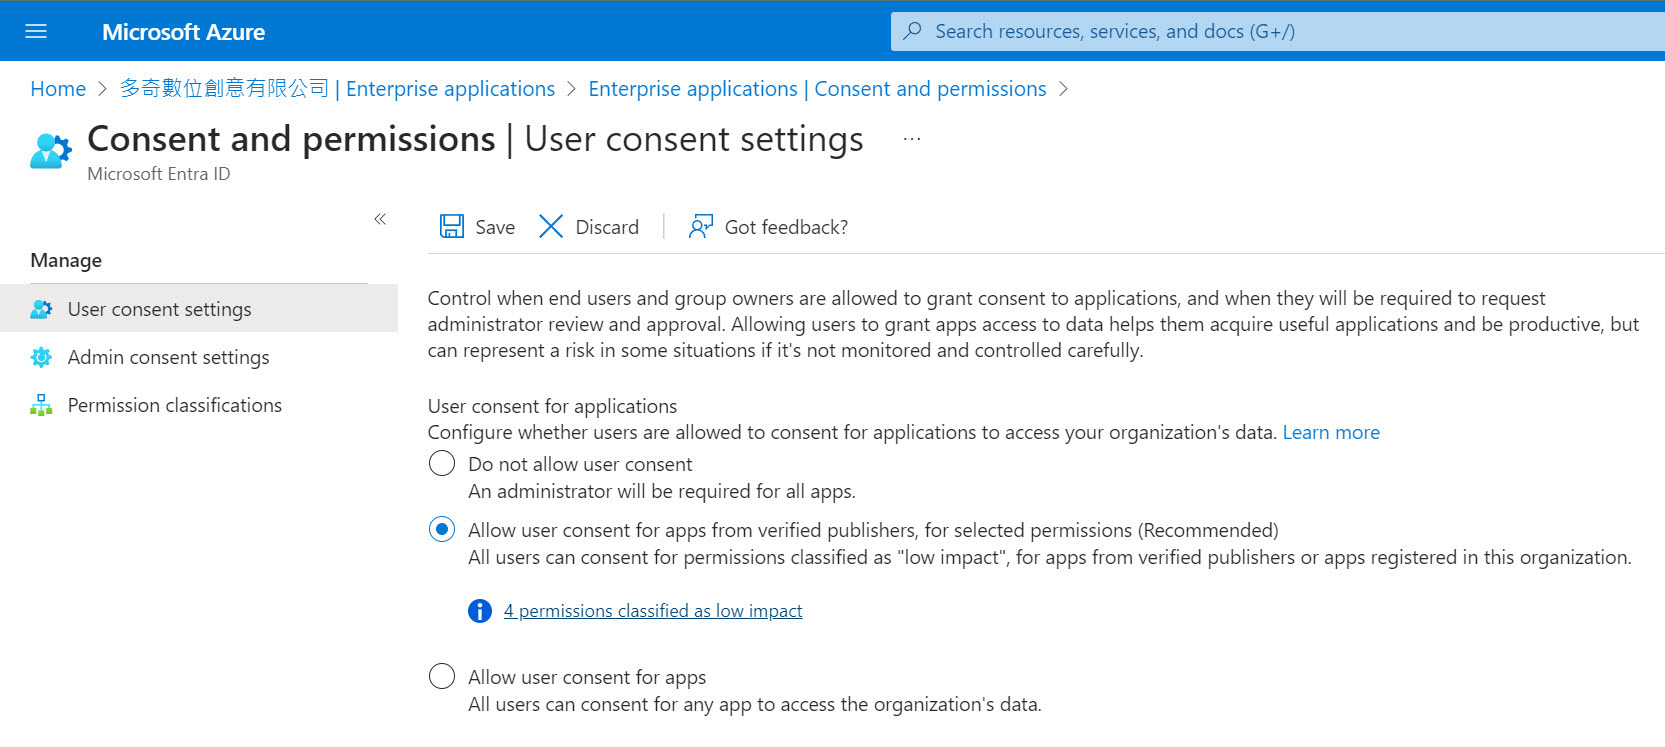 Microsoft Entra ID > Enterprise applications > Consent and permissions > User consent settings